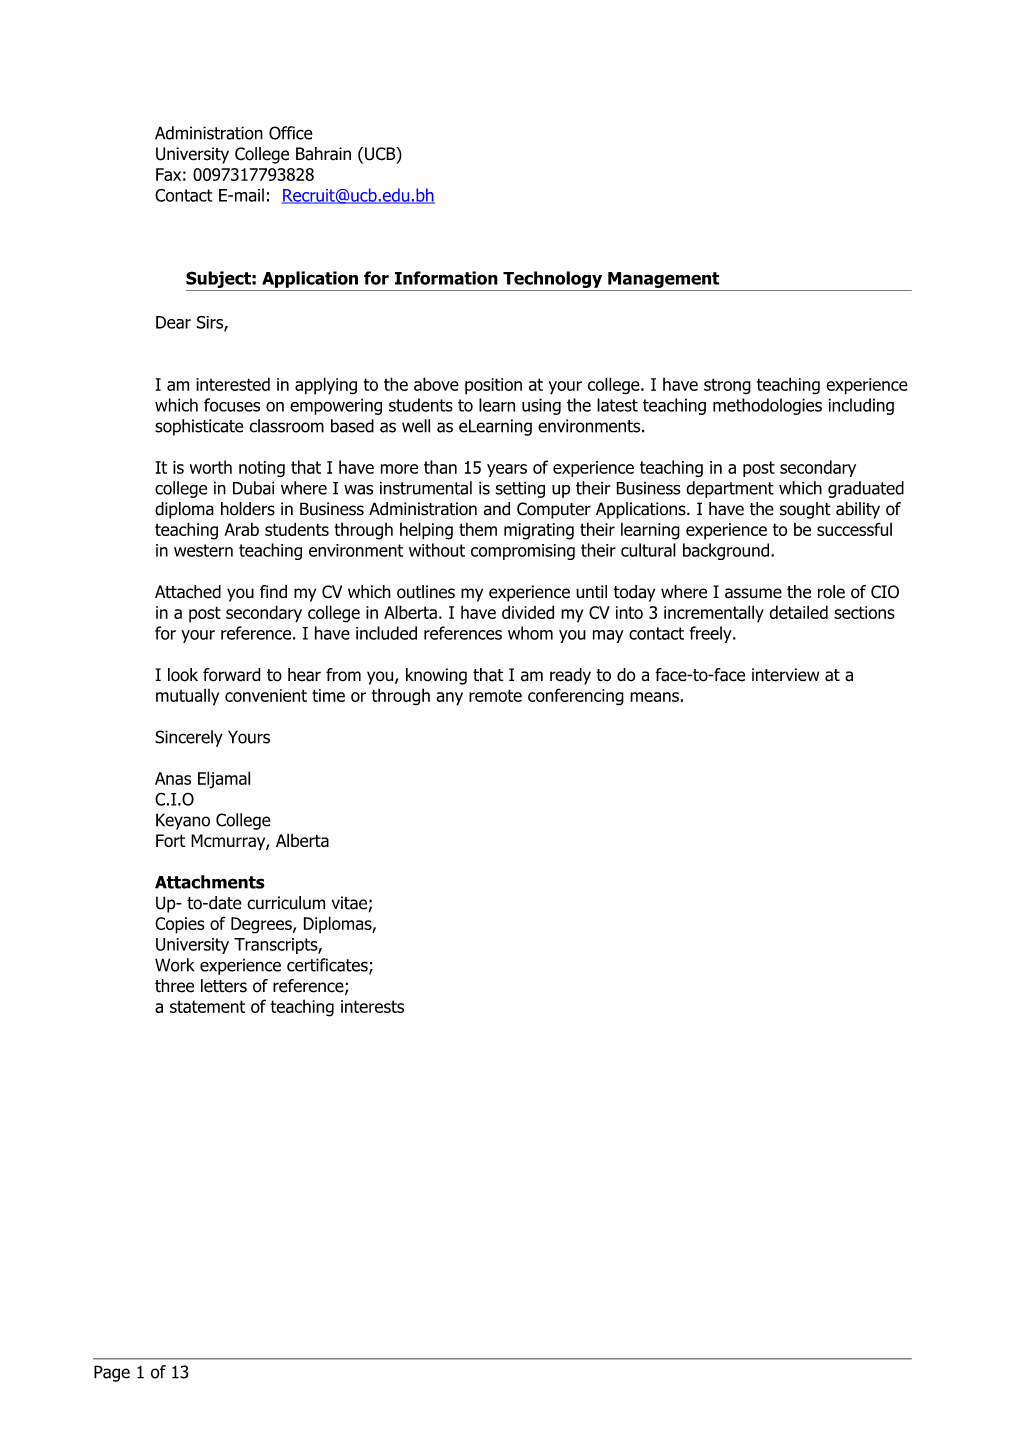 Subject: Application Forinformation Technology Management